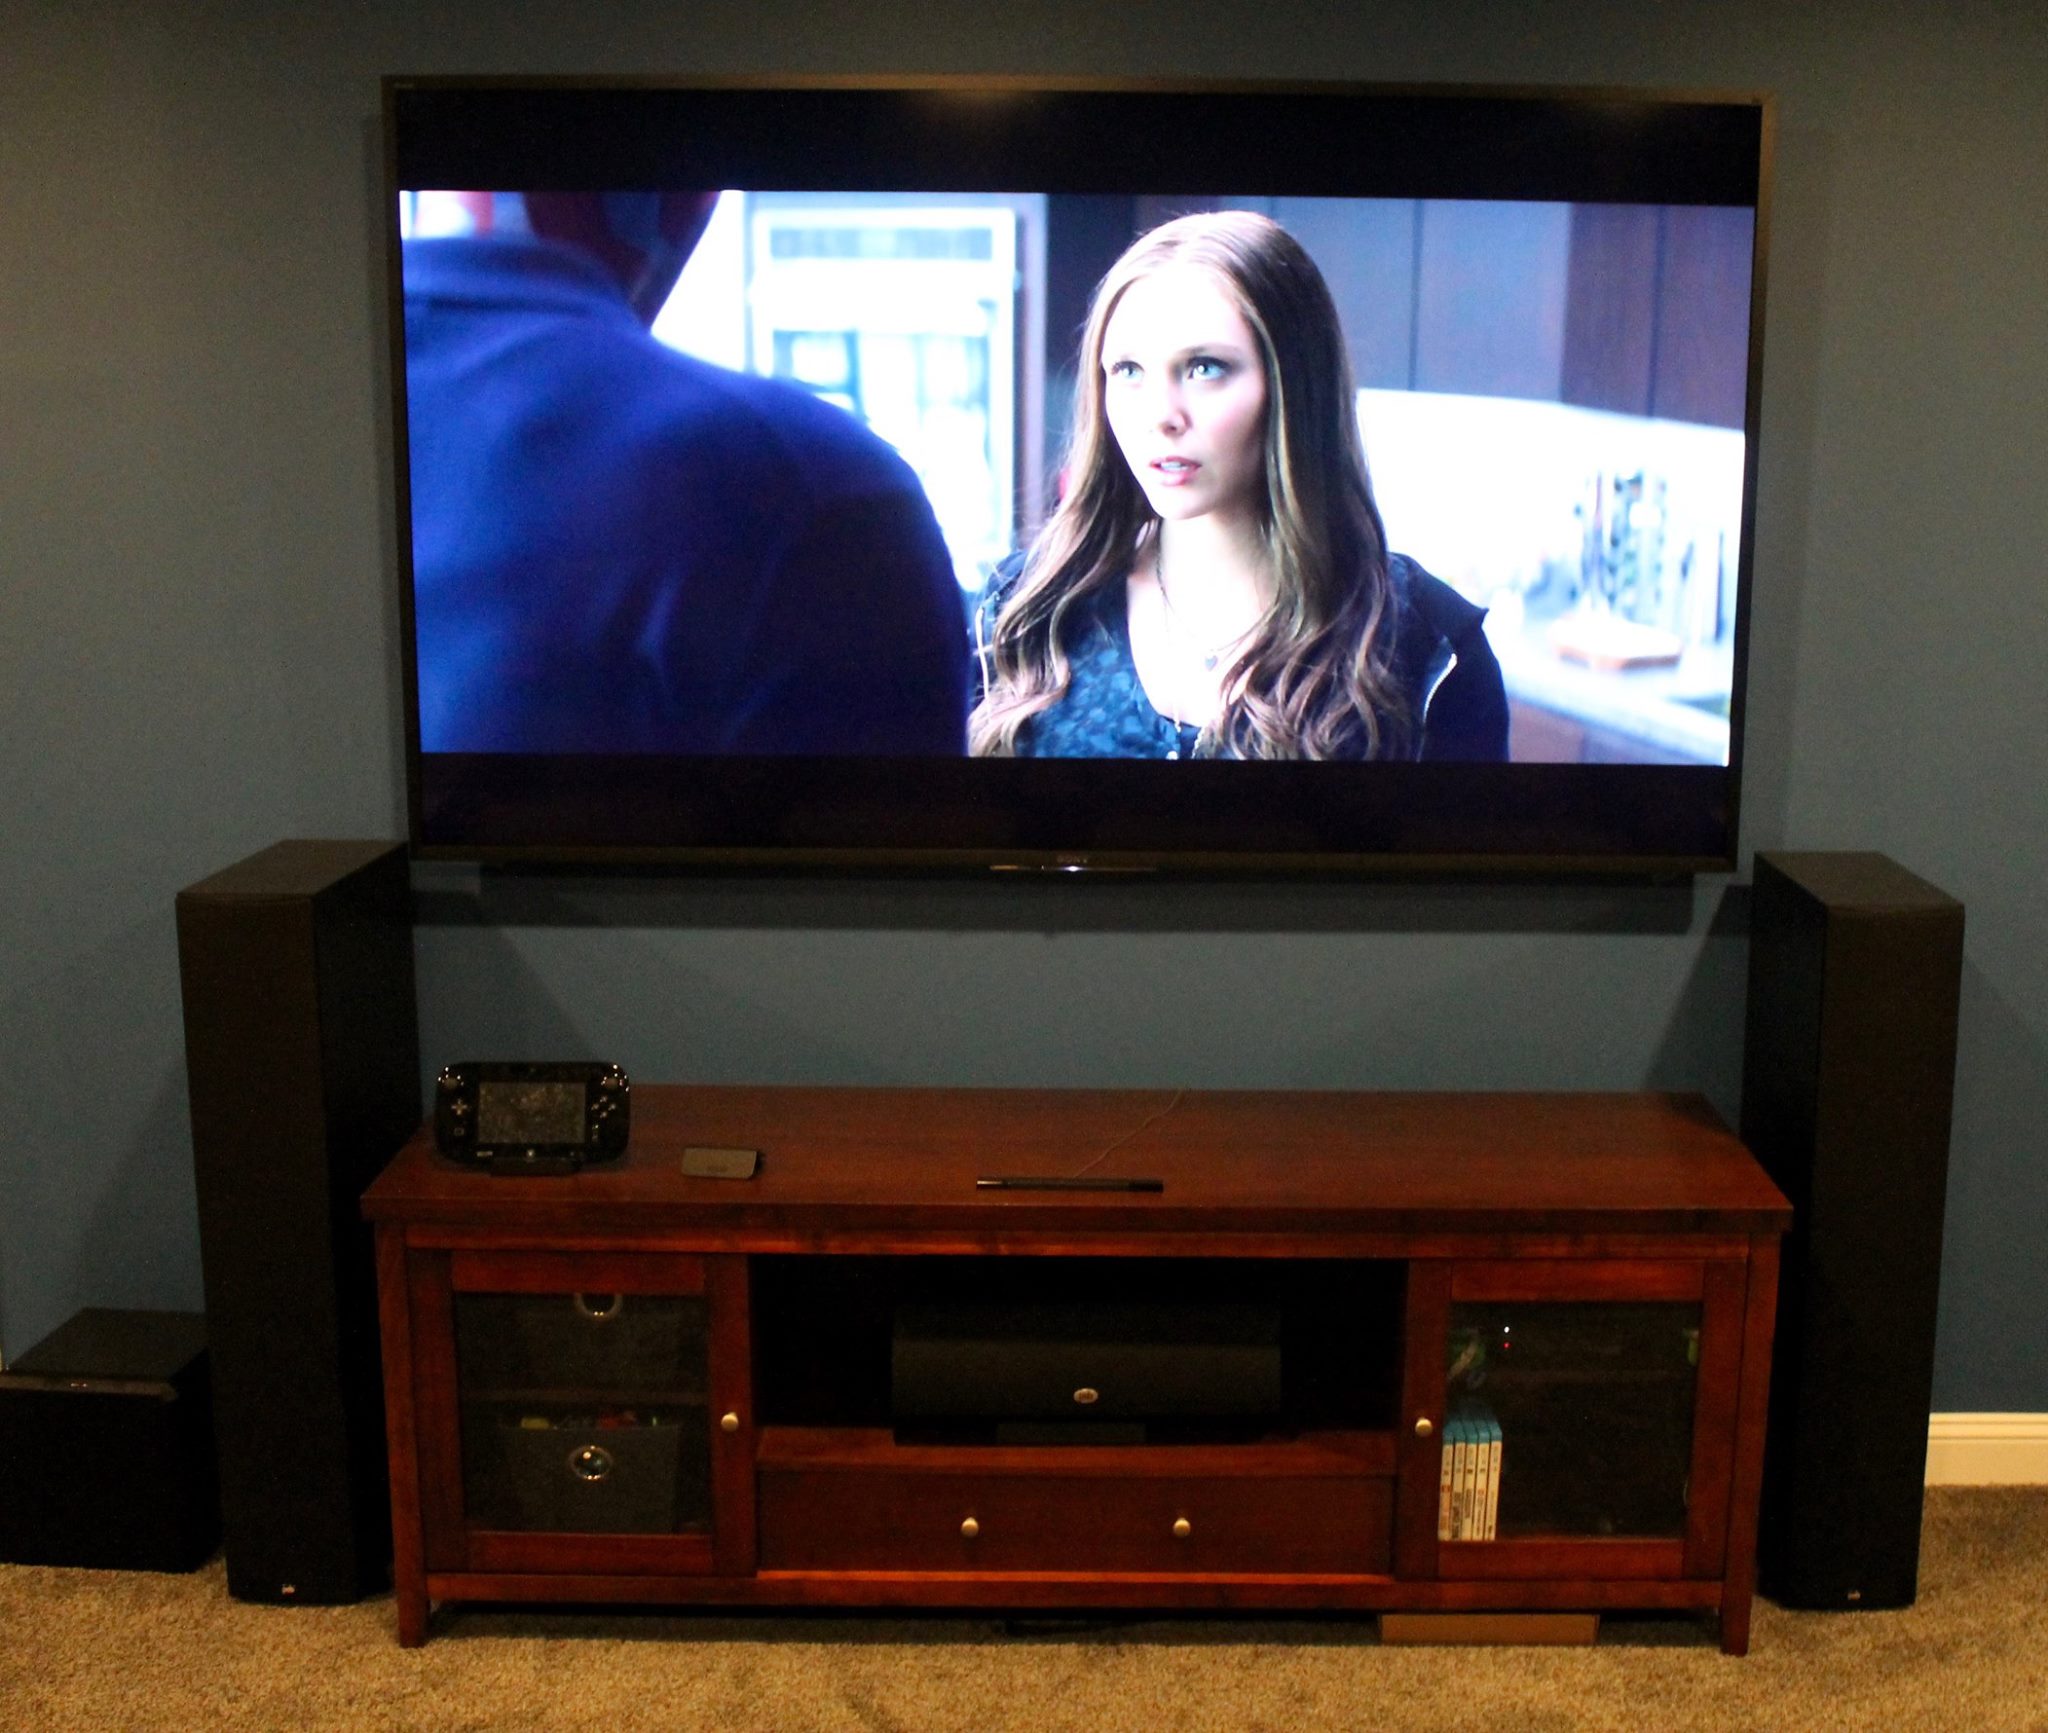 Wall Mounted TV with Floor Speakers